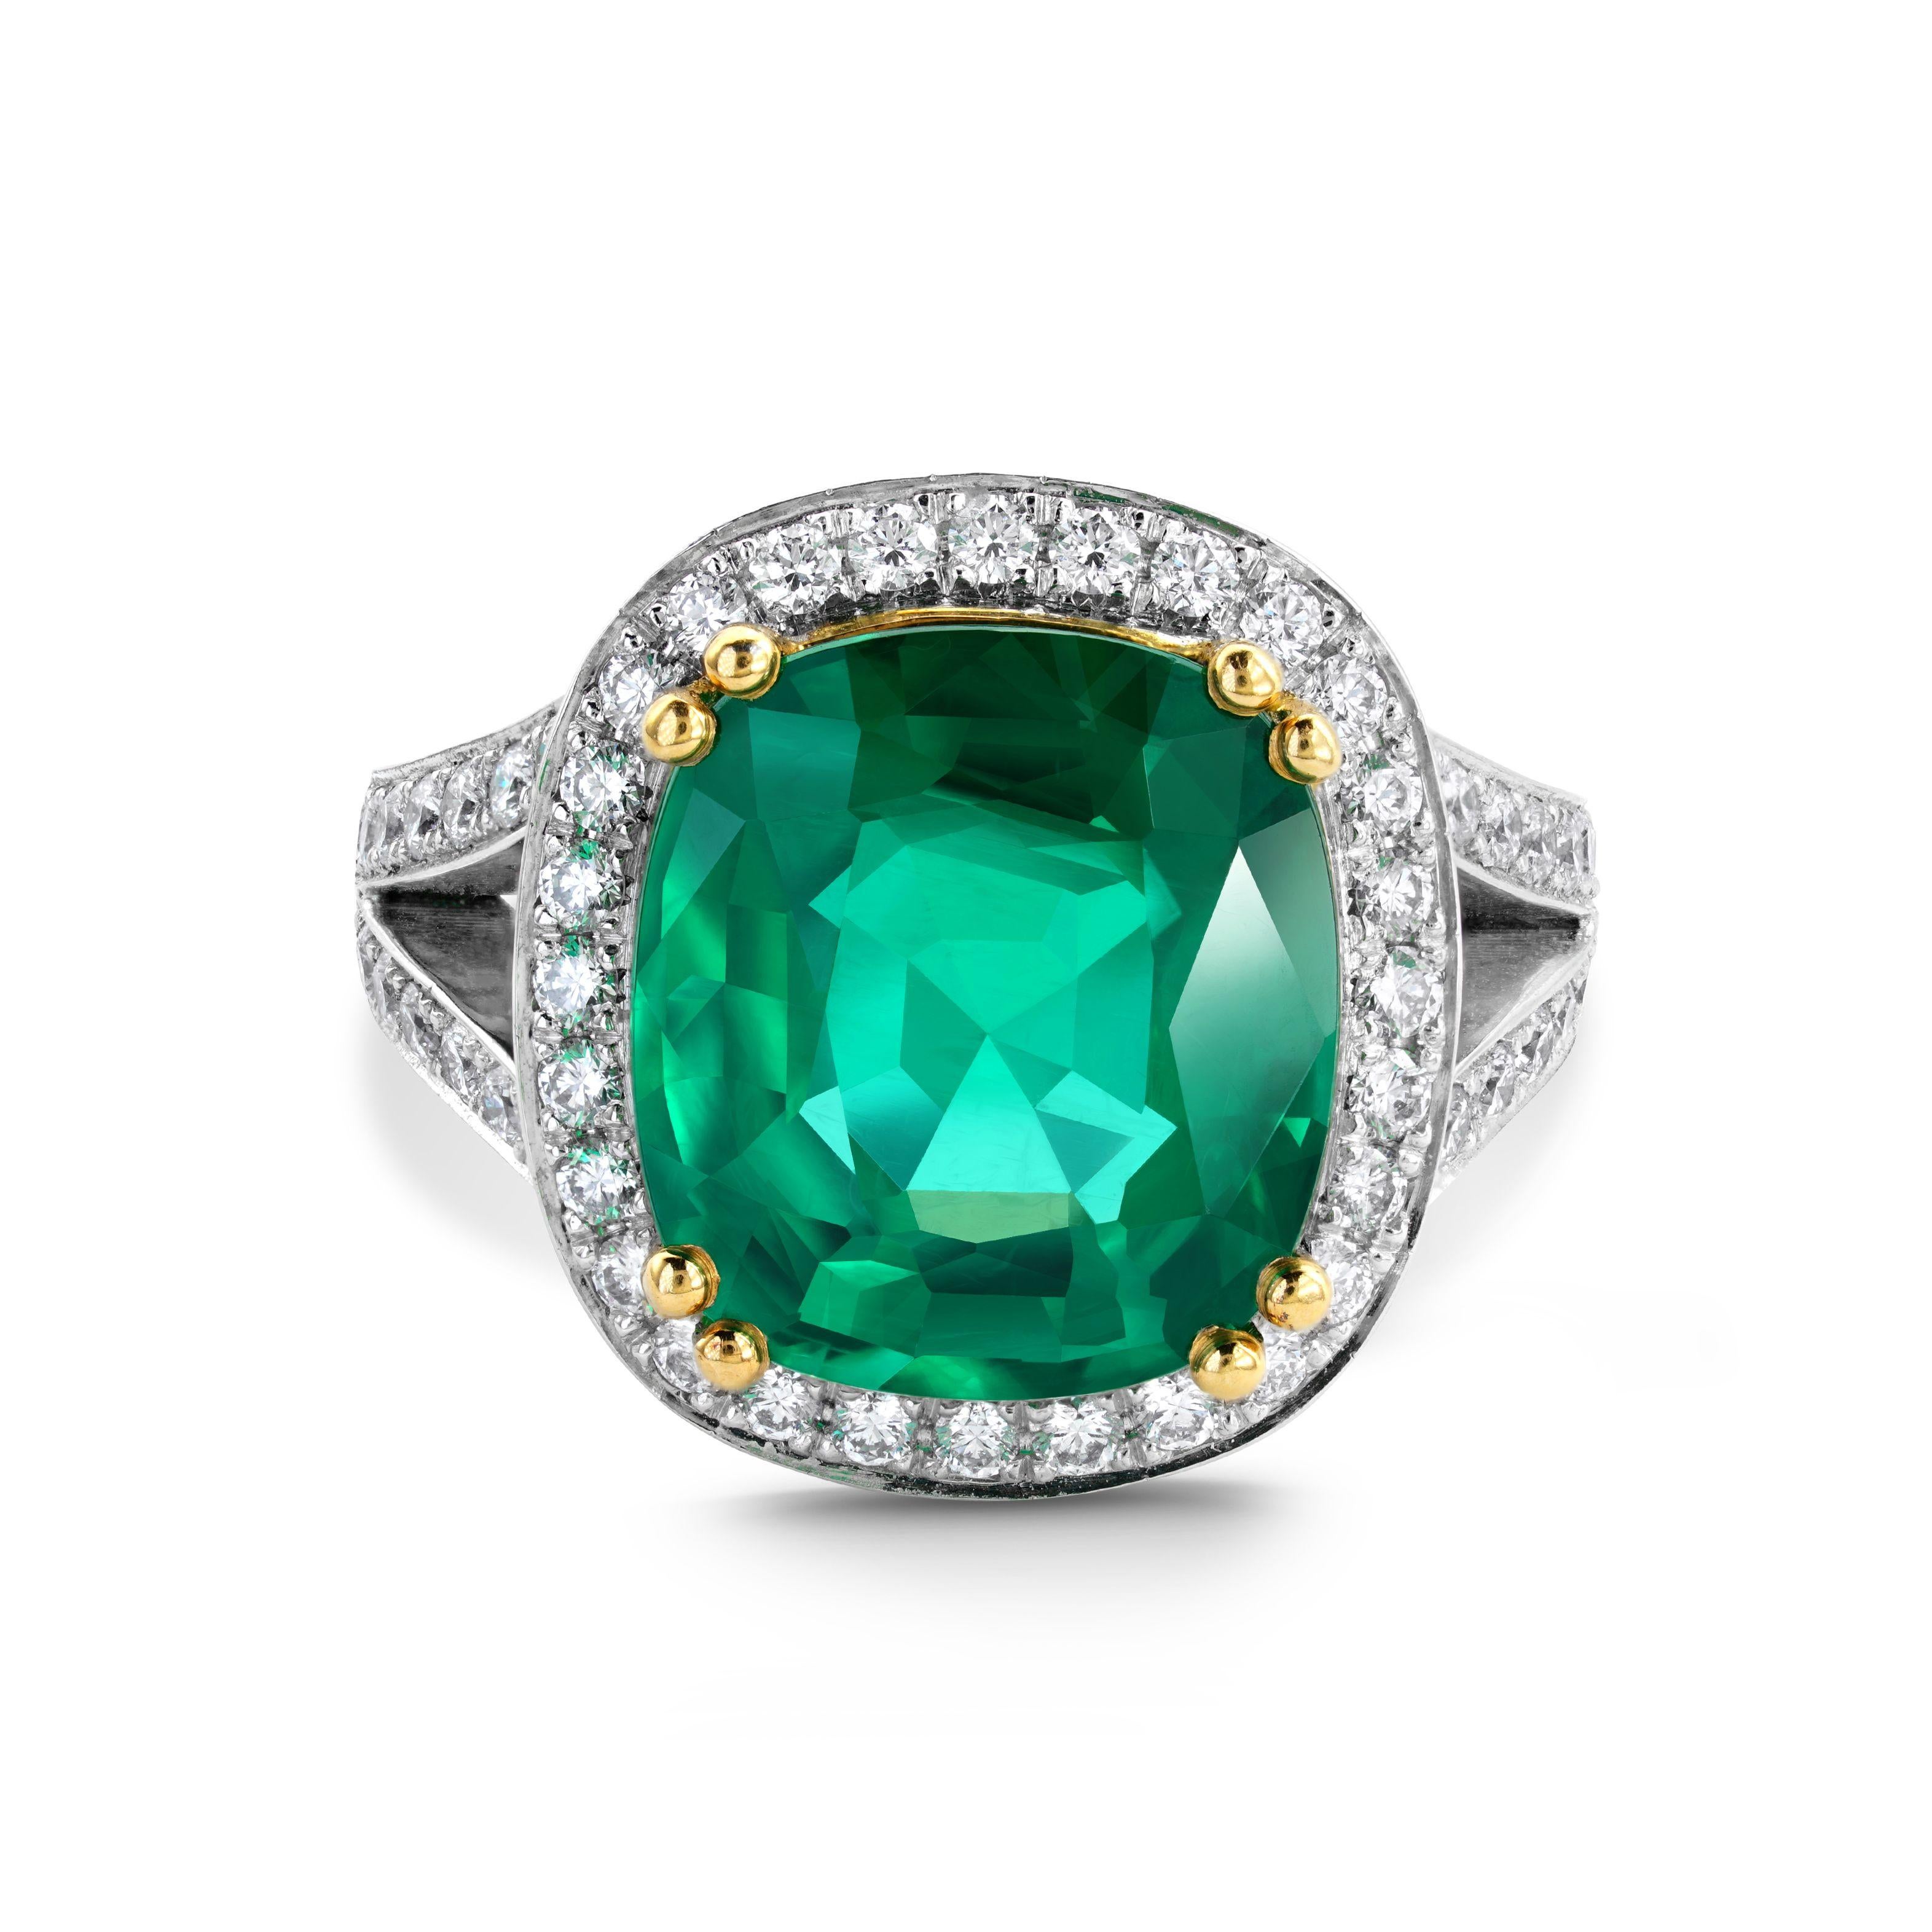 Beautiful Finely detailed 7.90 Carat Emerald Ring, surrounded by and accented on shoulders with a total of 56 round cut diamonds, weighing approx 0.80ct; clarity SI1; color H/I; GIA certificate attached. Exquisitely Hand crafted in 18 Karat yellow